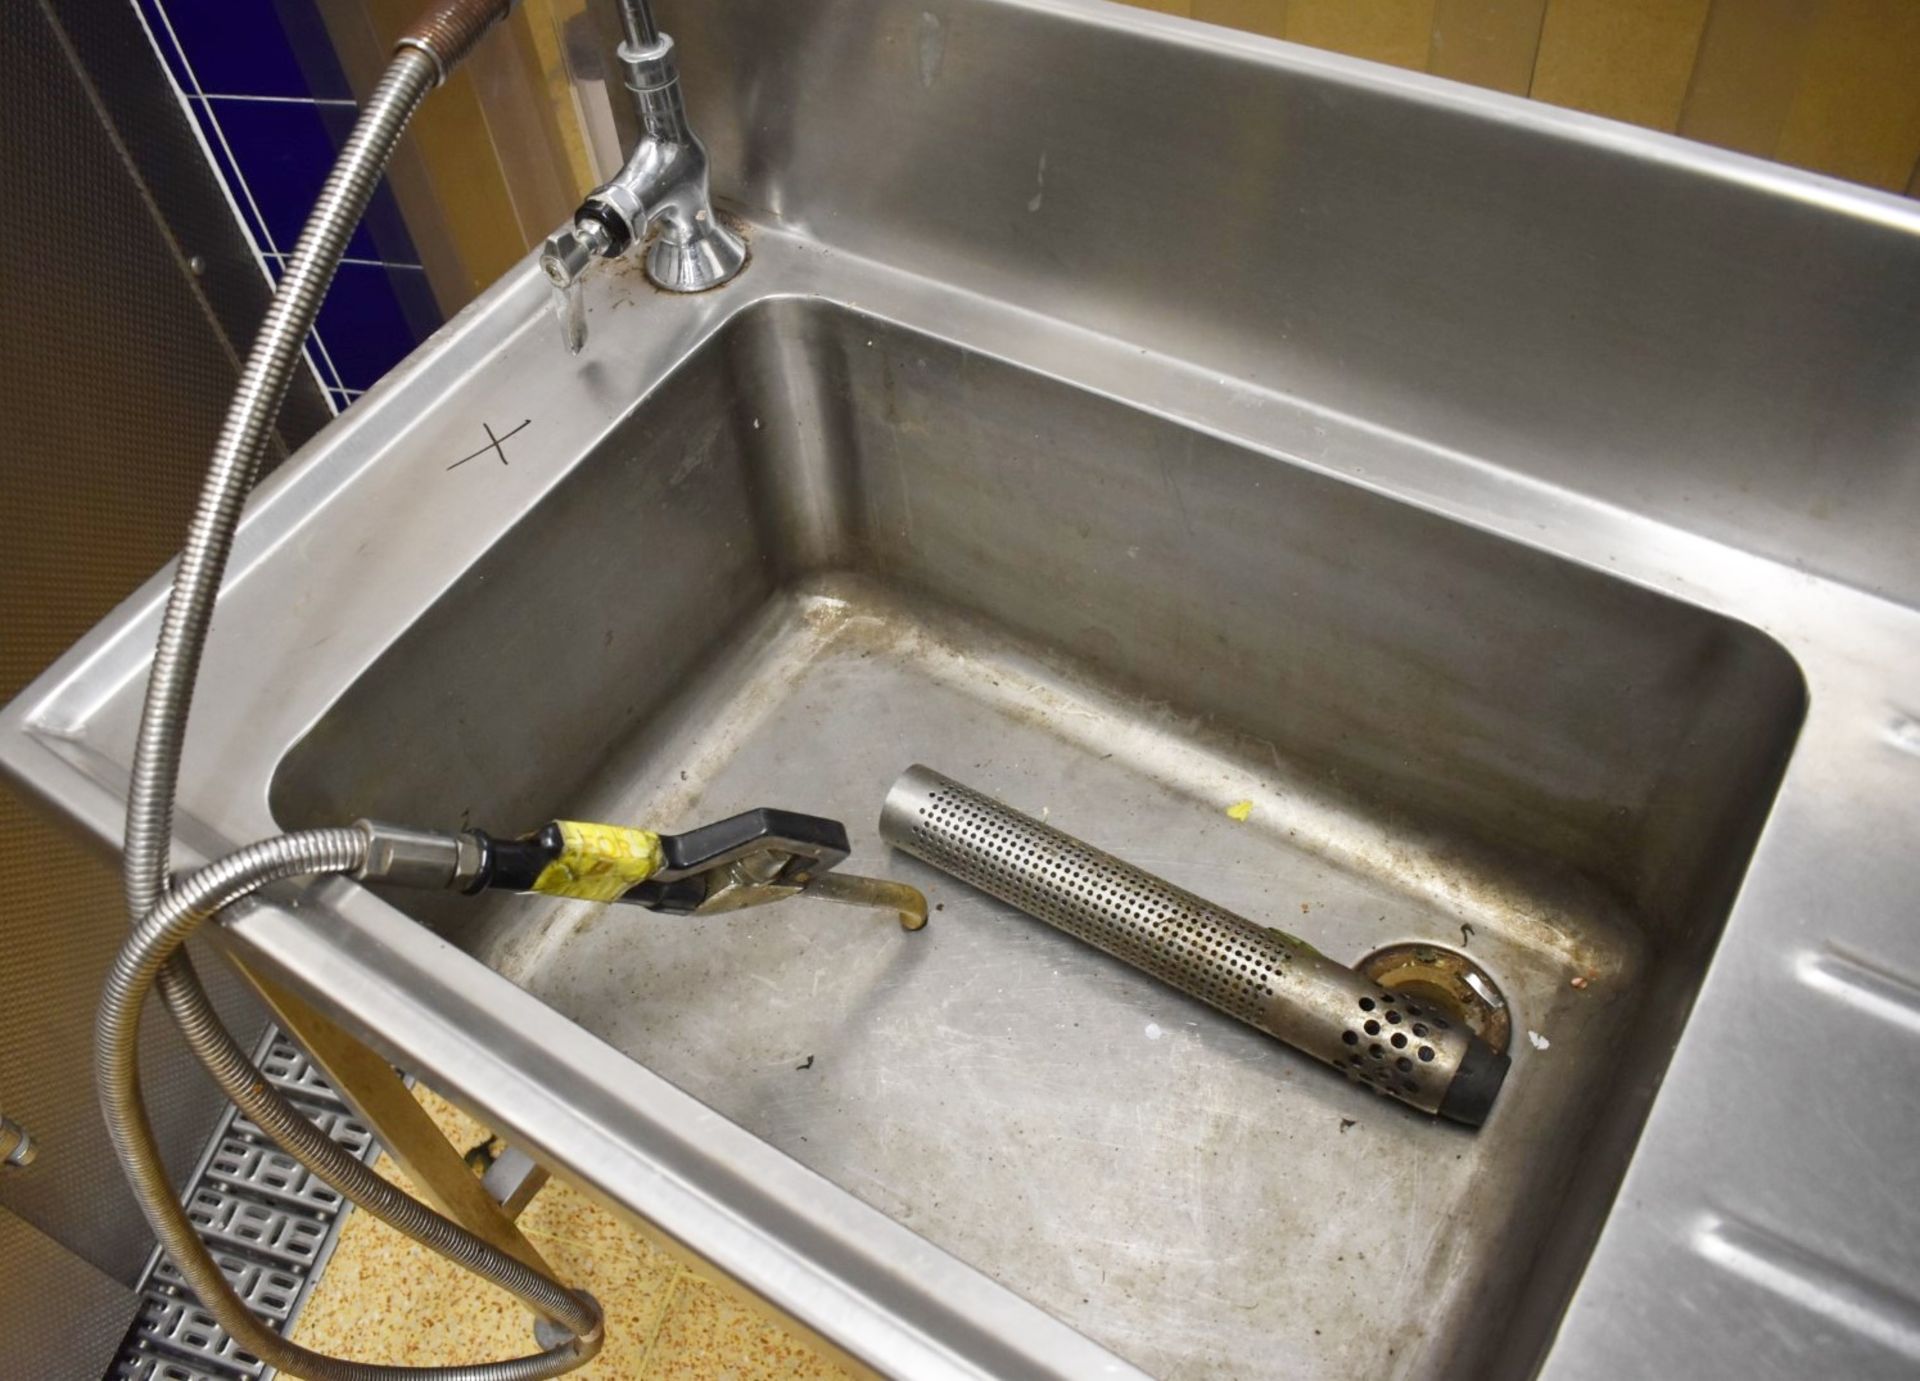 1 x Stainless Steel Sink Basin Wash Unit With Splashback and Hose Rinser Tap - H81 x W105 x D50 - Image 3 of 4